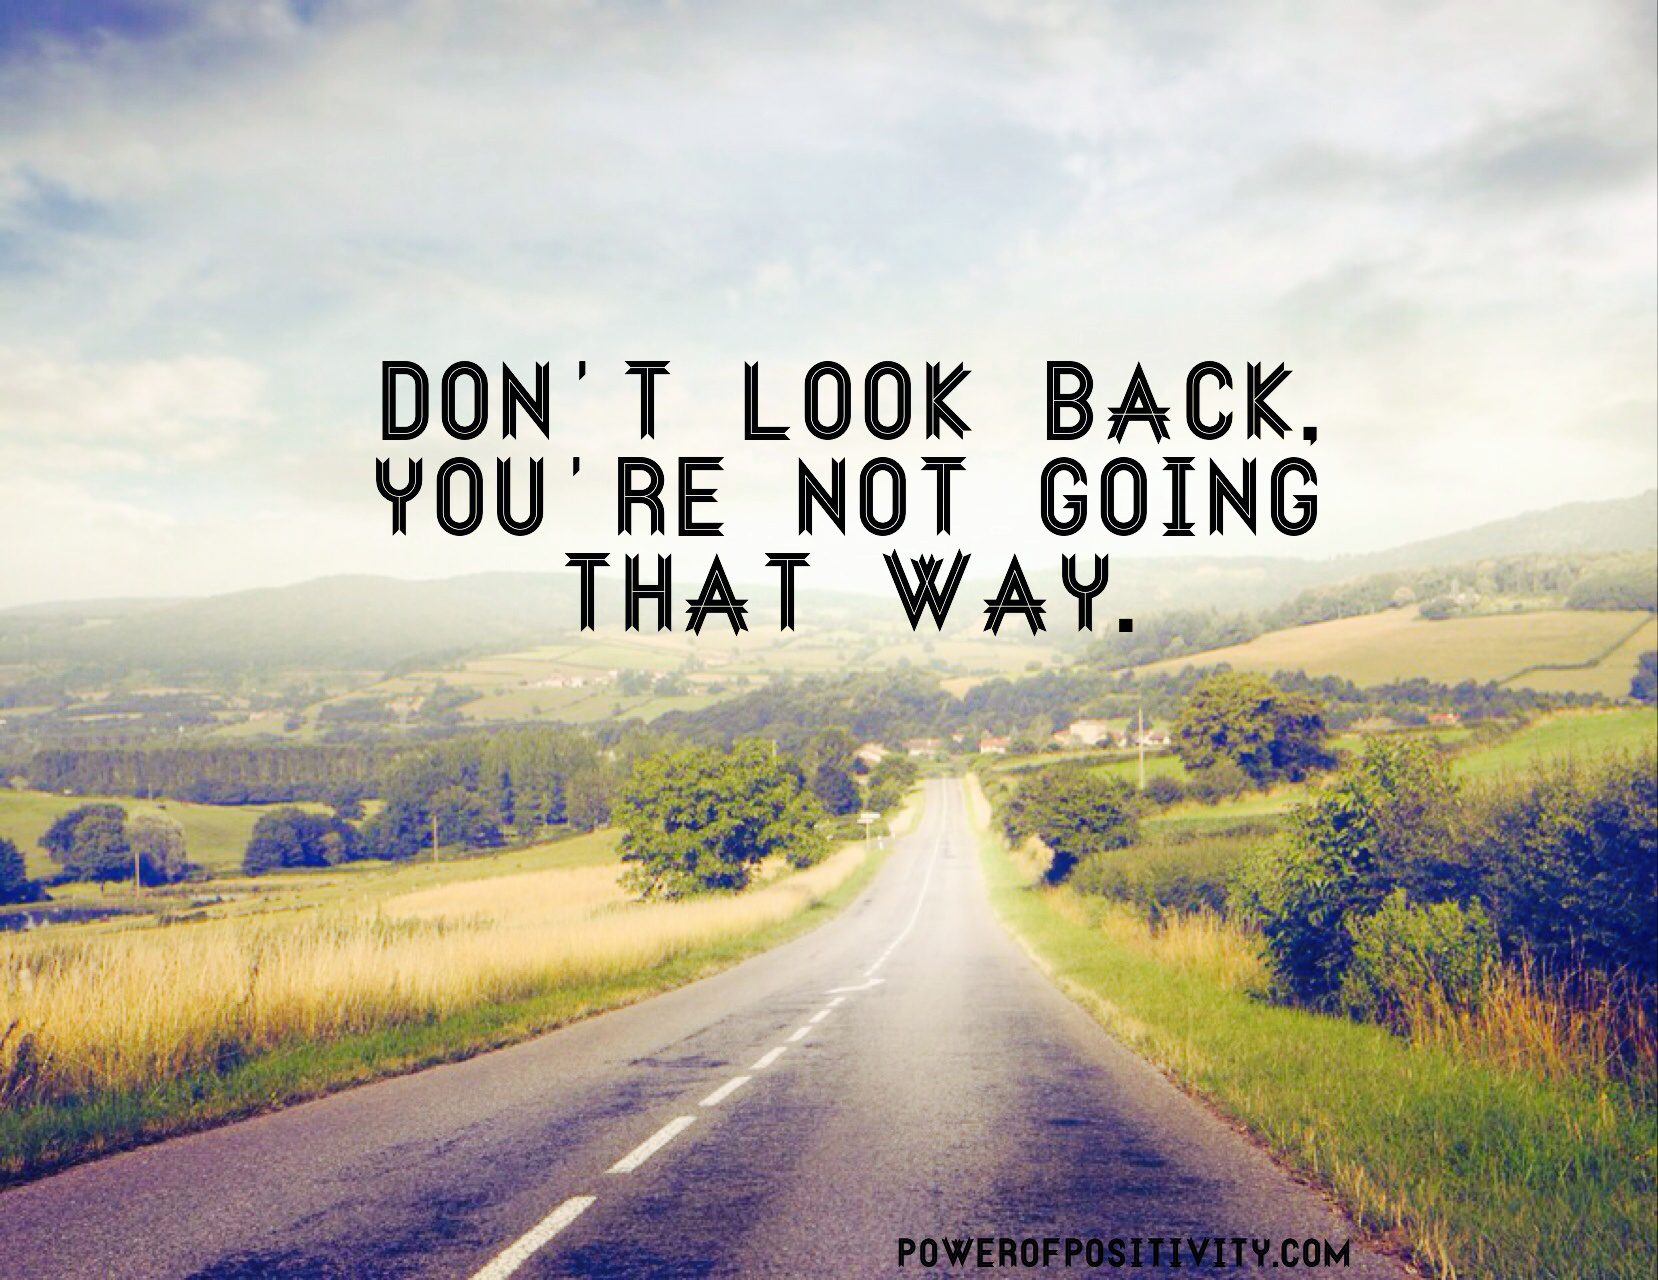 Don’t Look Back. You’re Not Going That Way.